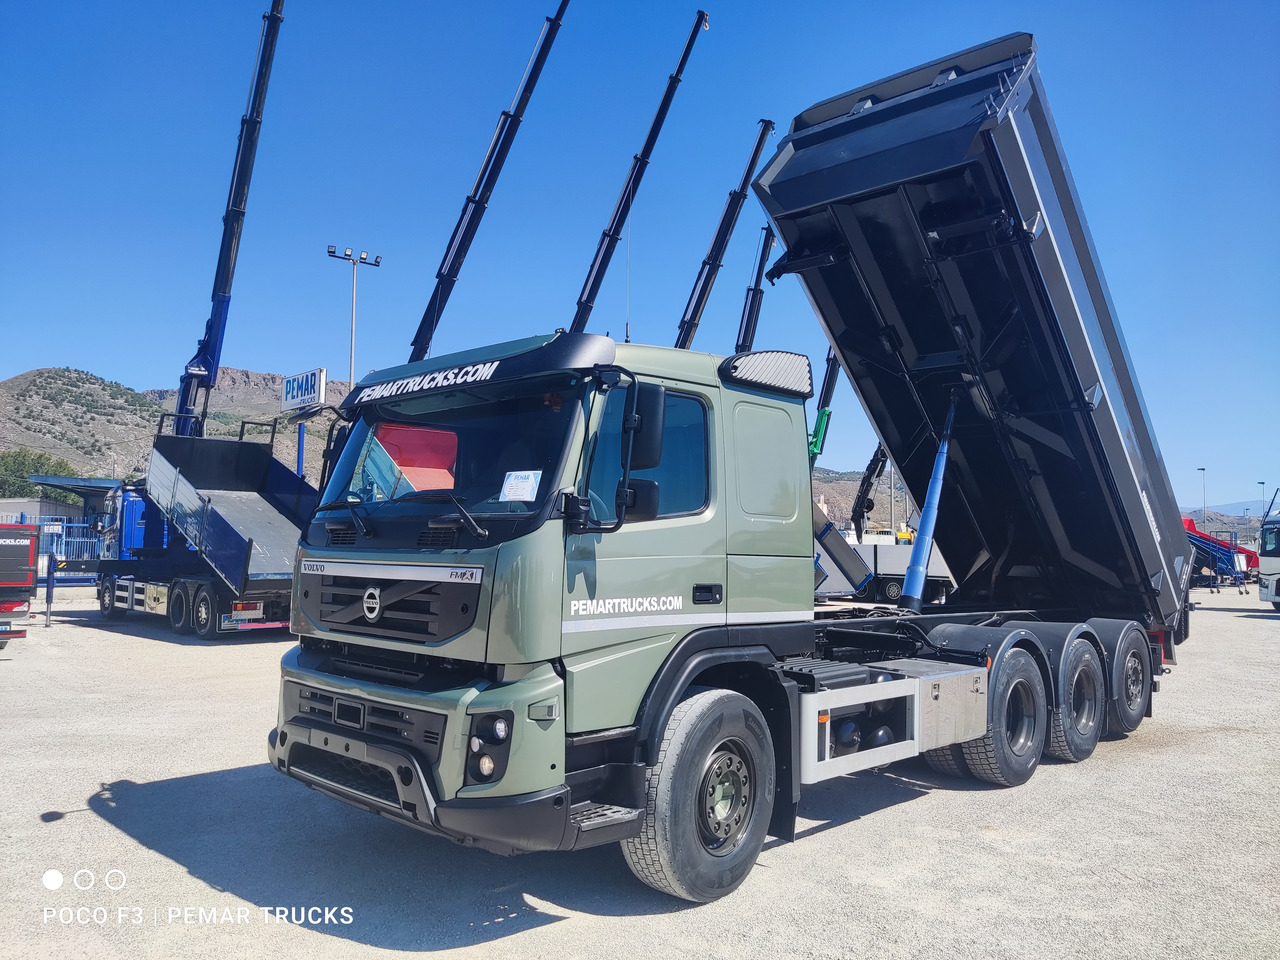 Volvo FMX 500 6x4, hub reduction for sale, Tipper, 27950 EUR - 7728272